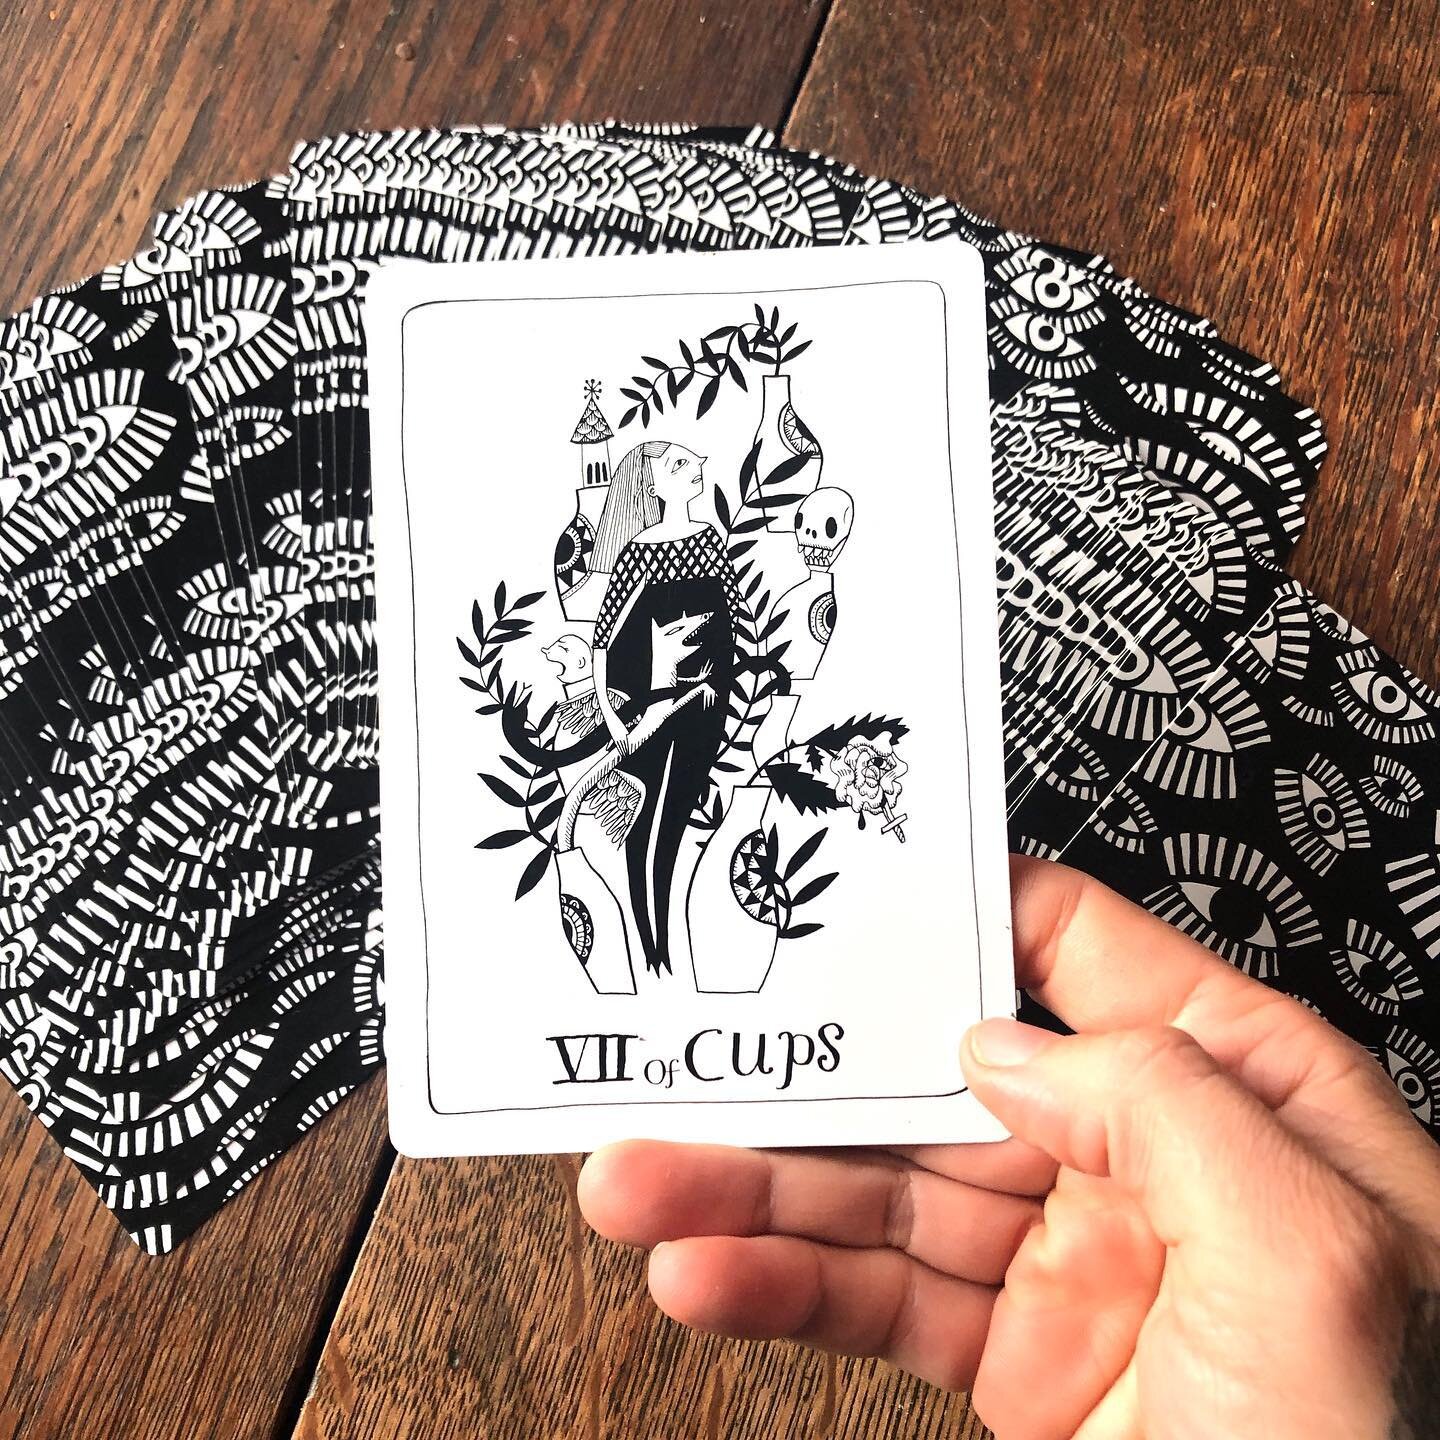 The 7 of cups. It represents being overwhelmed by all. the. things. or stuck in a daydream. 

When I feel this way, drawing is the practice I use to reconnect to how I&rsquo;m feeling and what I need. 

There&rsquo;s still room and time to sign up fo